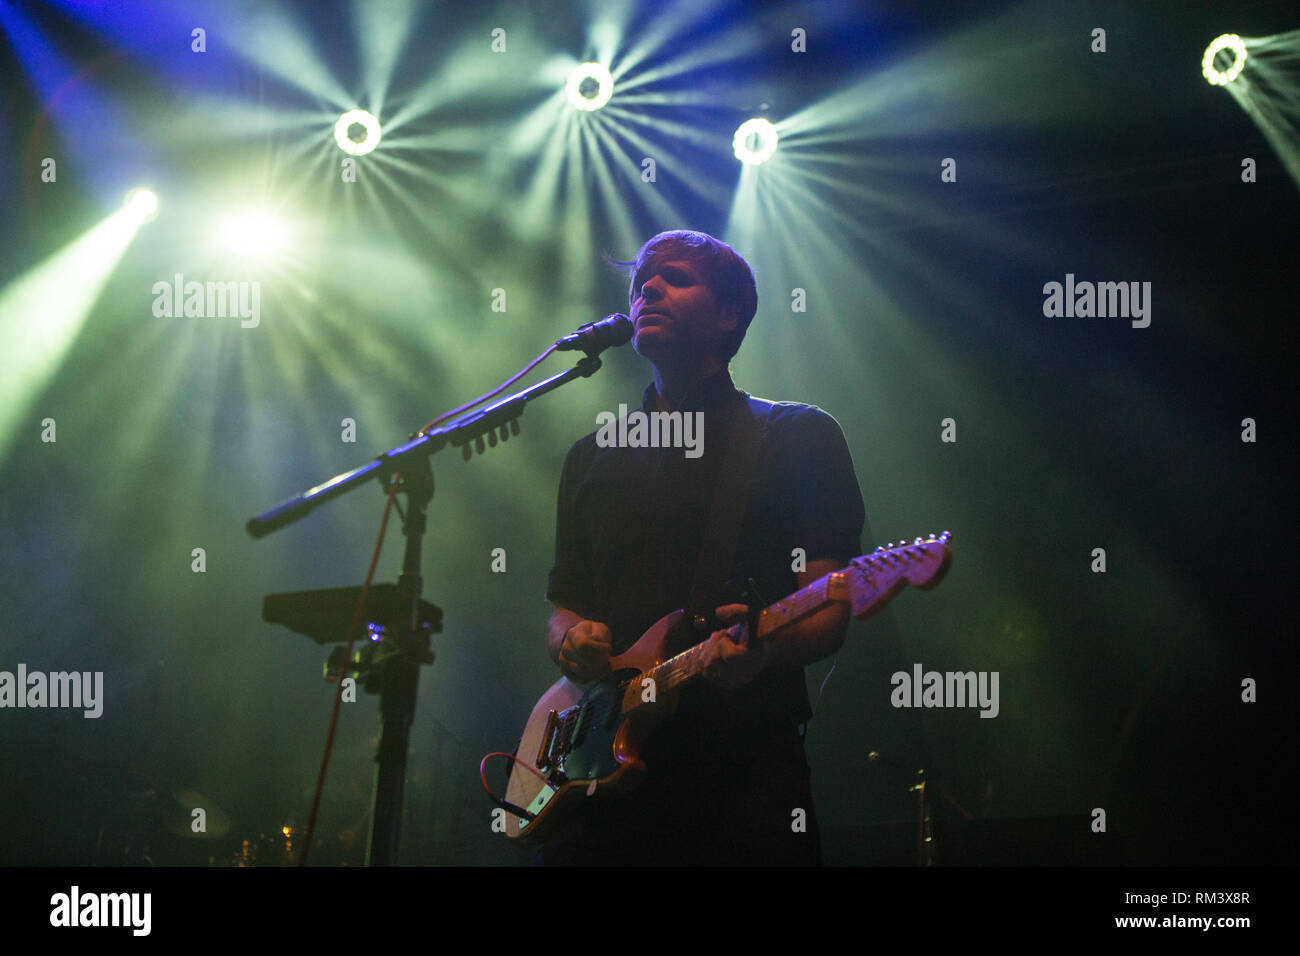 Oslo, Norway. 12th Feb, 2019. Norway, Oslo - February 12, 2019. The American alternative rock band Death Cab For Cutie performs a live concert at Sentrum Scene in Oslo. Here singer and musician Ben Gibbard is seen live on stage. (Photo Credit: Gonzales Photo/Alamy Live News Stock Photo